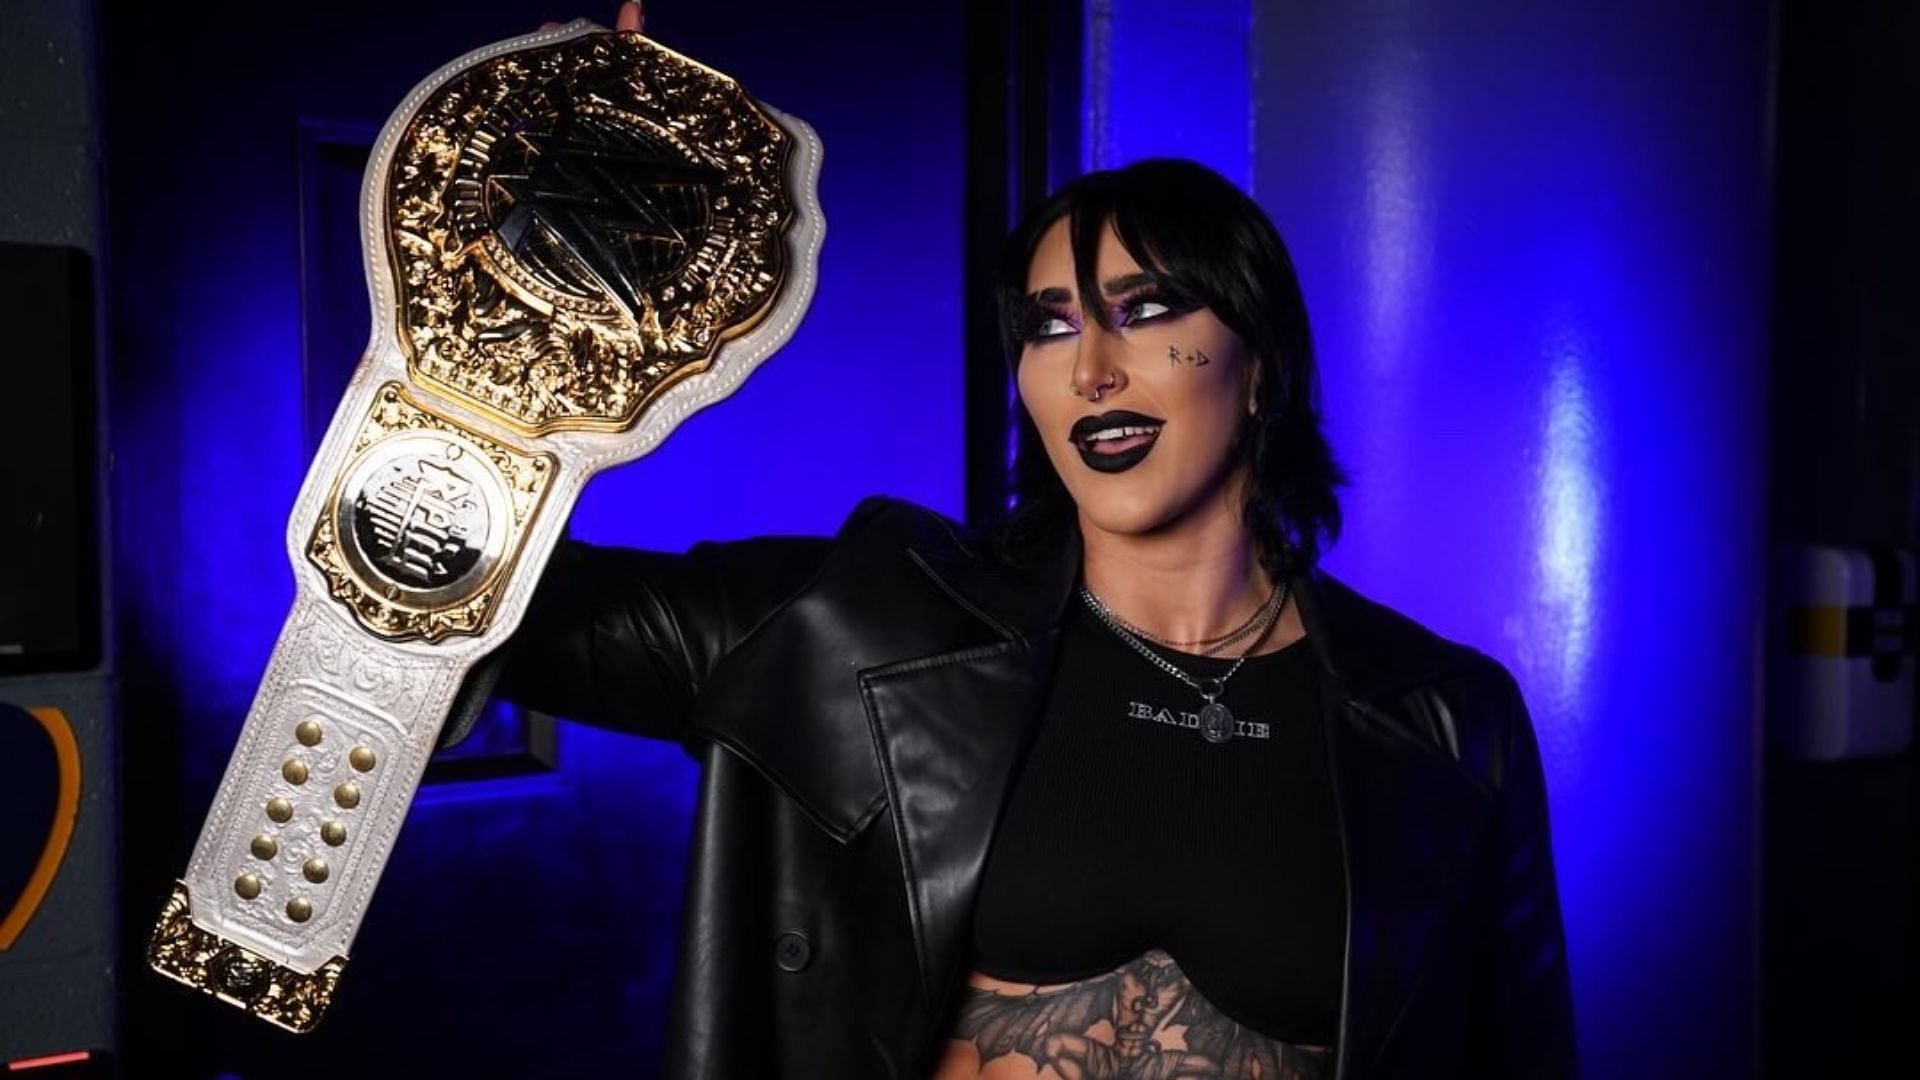 Rhea Ripley is set to face Becky Lynch at WrestleMania XL